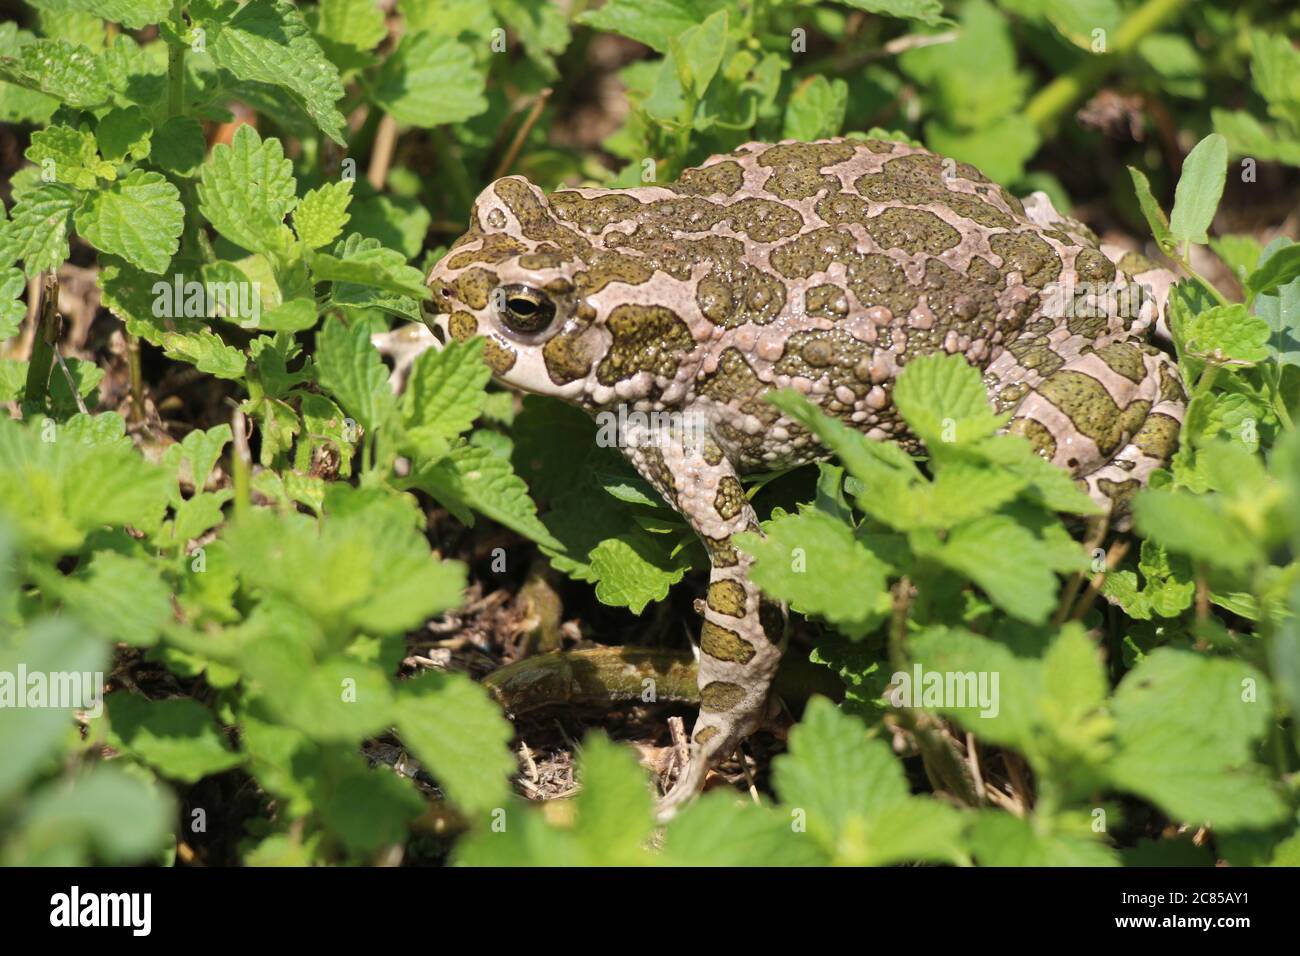 A green toad upon the ground Stock Photo